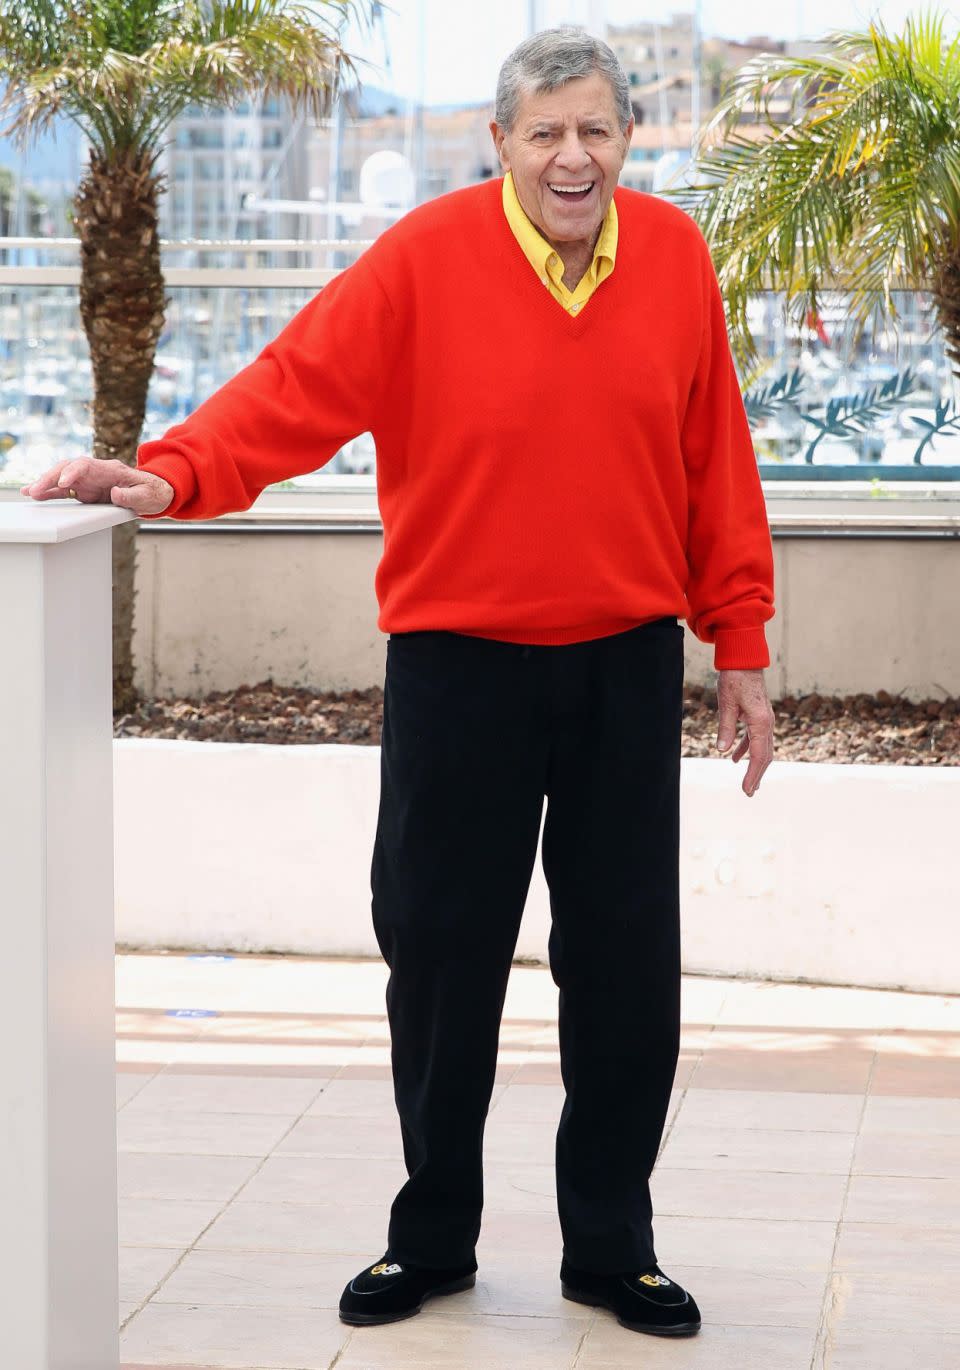 Back in 2009, paternity test results revealed there was 88.7 per cent certainty that Jerry Lewis was Suzan's father - Jerry pictured in 2013. Source: Getty